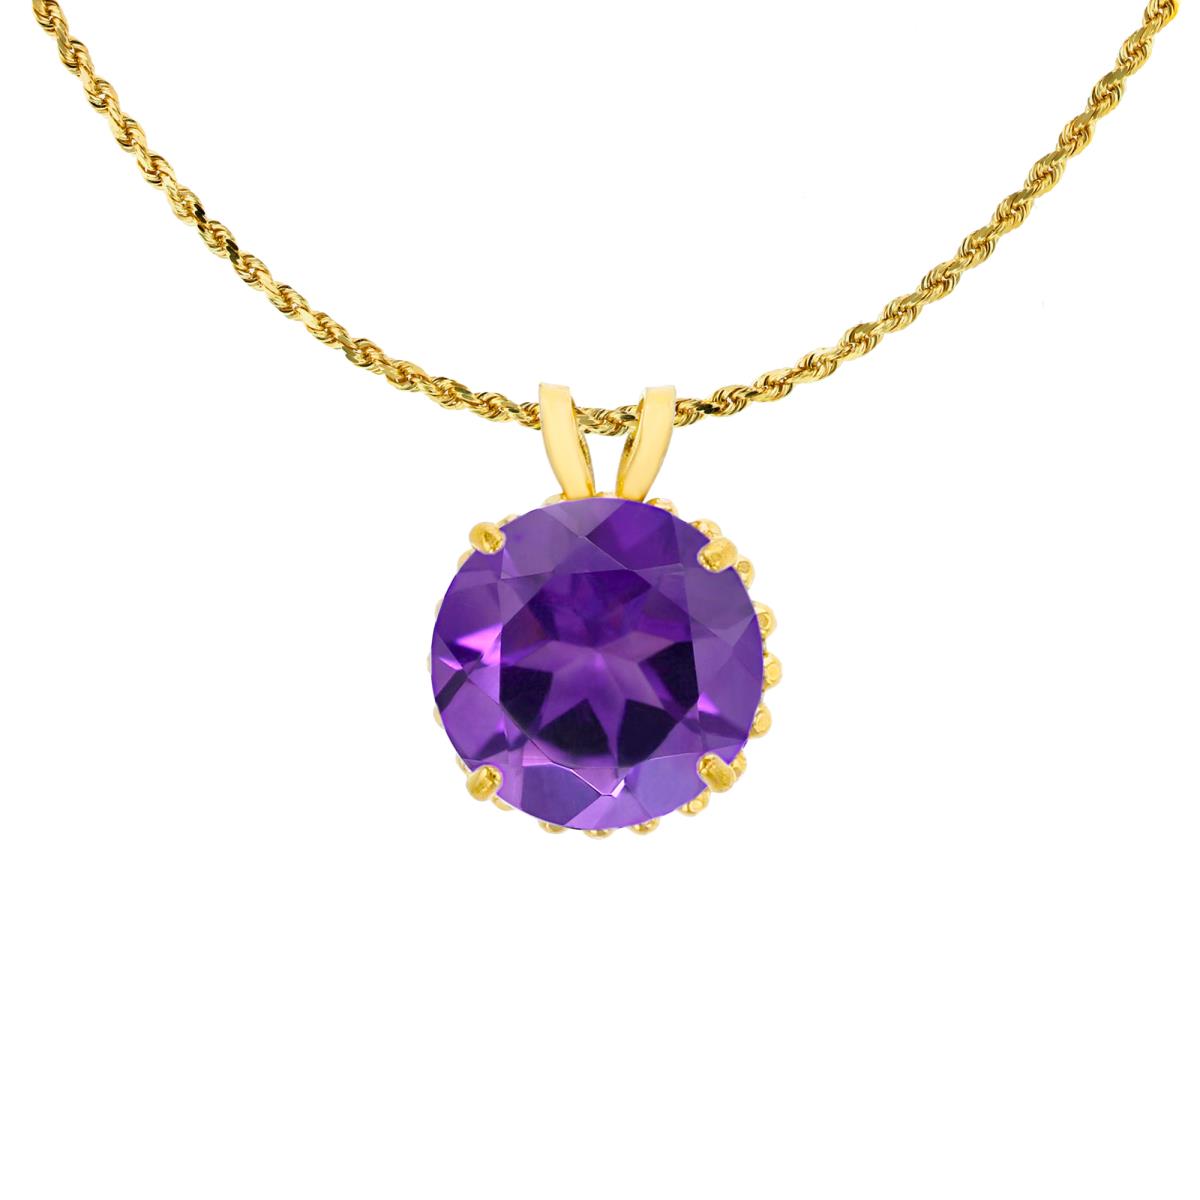 10K Yellow Gold 7mm Rd Cut Amethyst with Bead Frame Rabbit Ear 18" Rope Chain Necklace